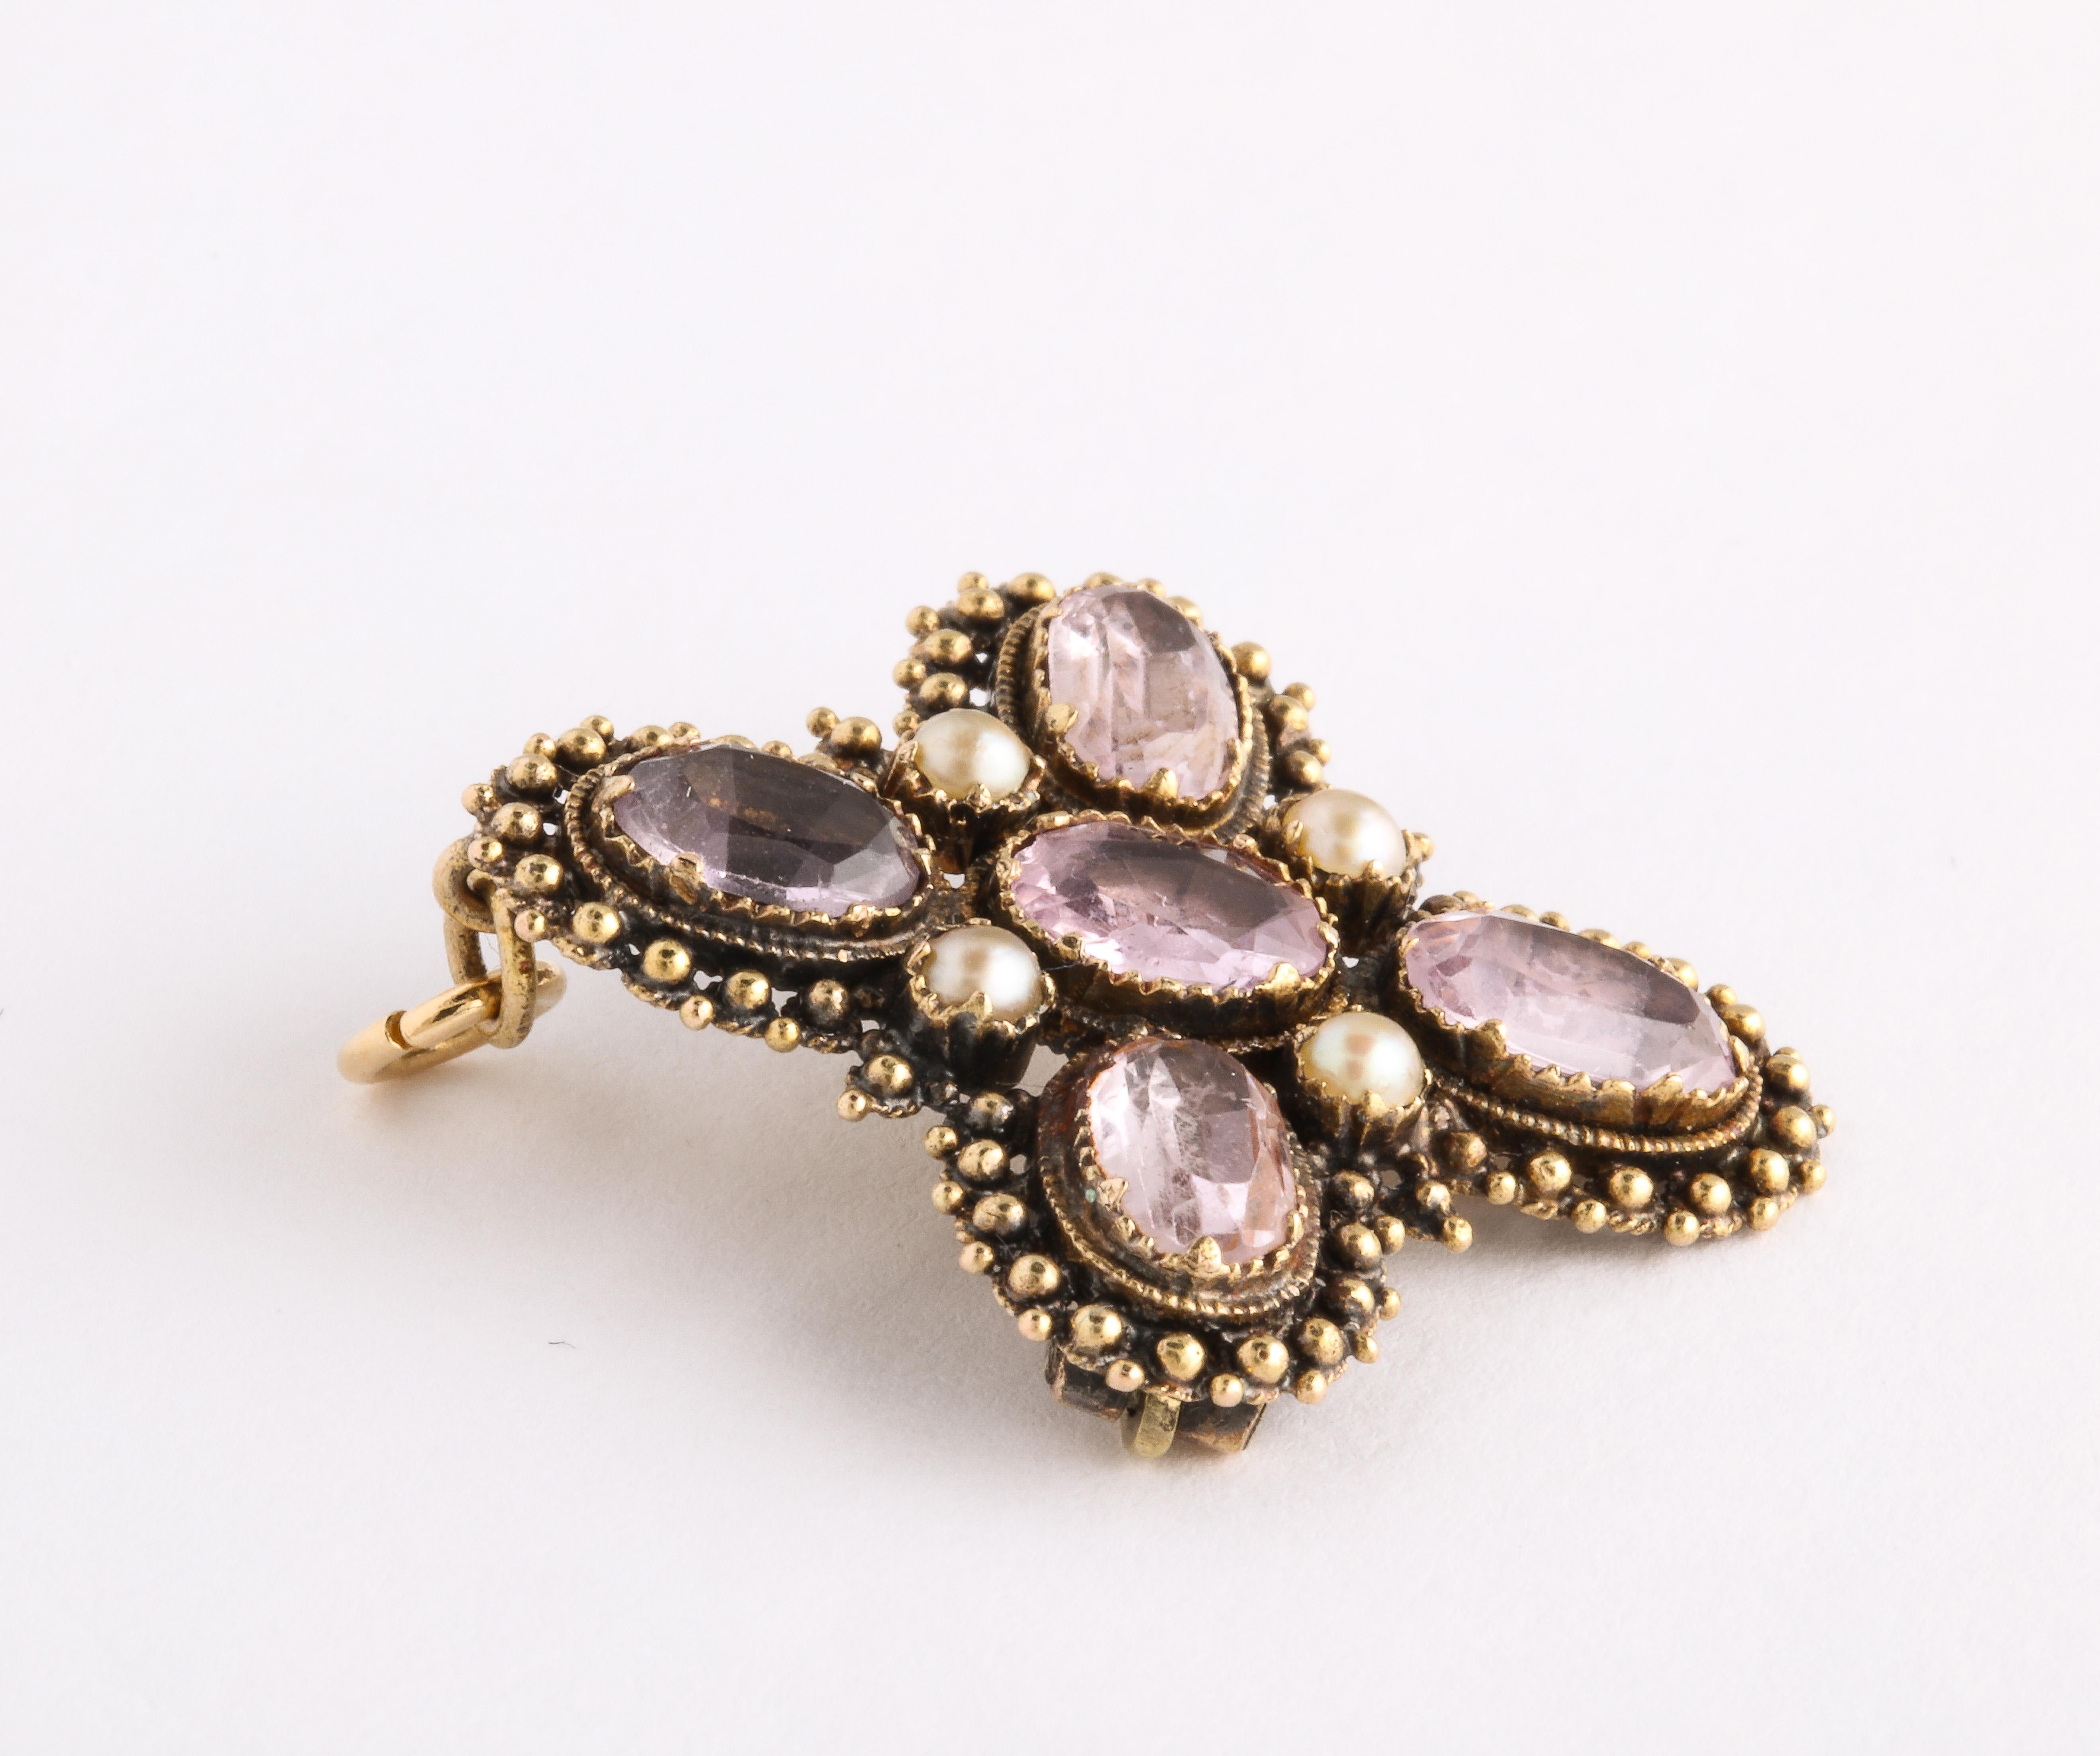 Georgian 18 Karat Gold Amethyst Pearl Granulated Pendant or Brooch In Excellent Condition For Sale In Stamford, CT